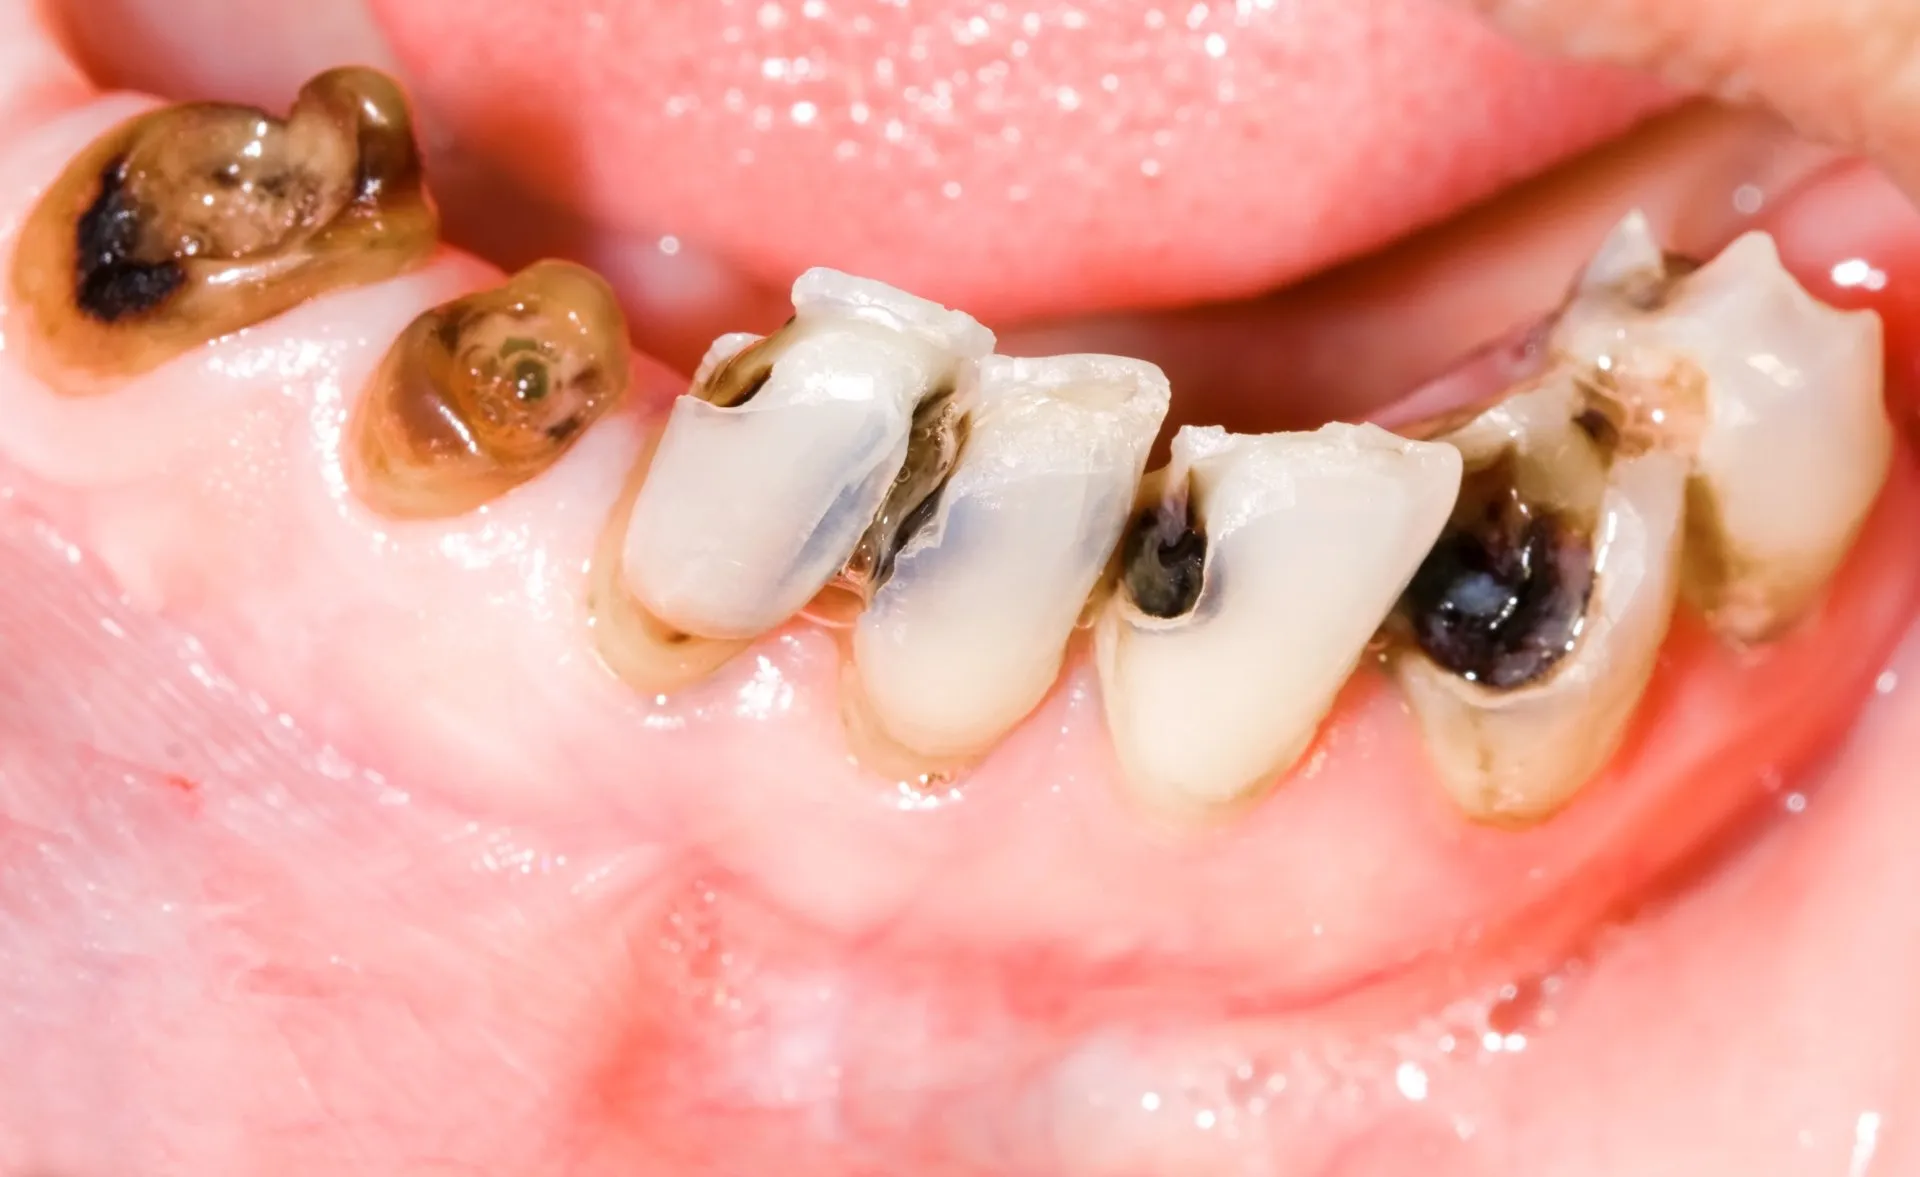 5 Common Causes of Tooth Decay and How to Prevent It